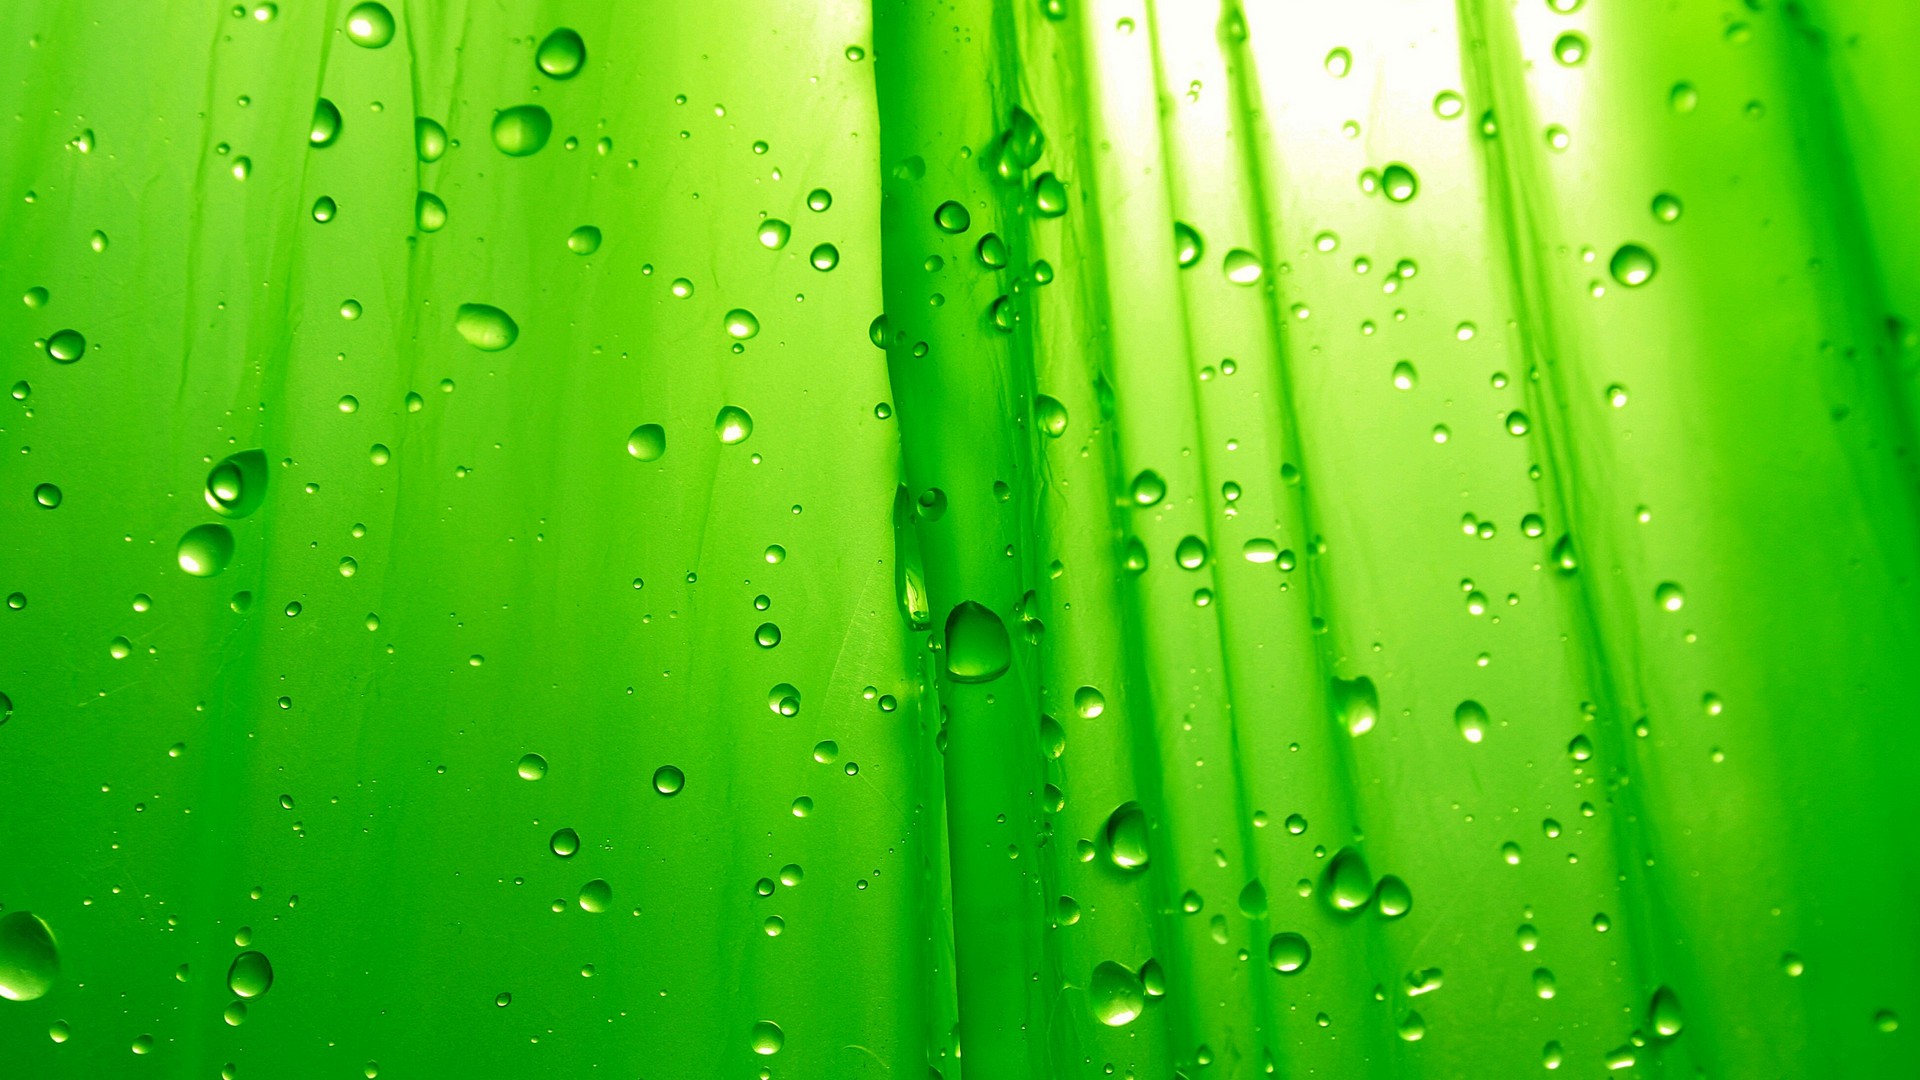 HD Wallpaper Light Green With Resolution 1920X1080 pixel. You can make this wallpaper for your Desktop Computer Backgrounds, Mac Wallpapers, Android Lock screen or iPhone Screensavers